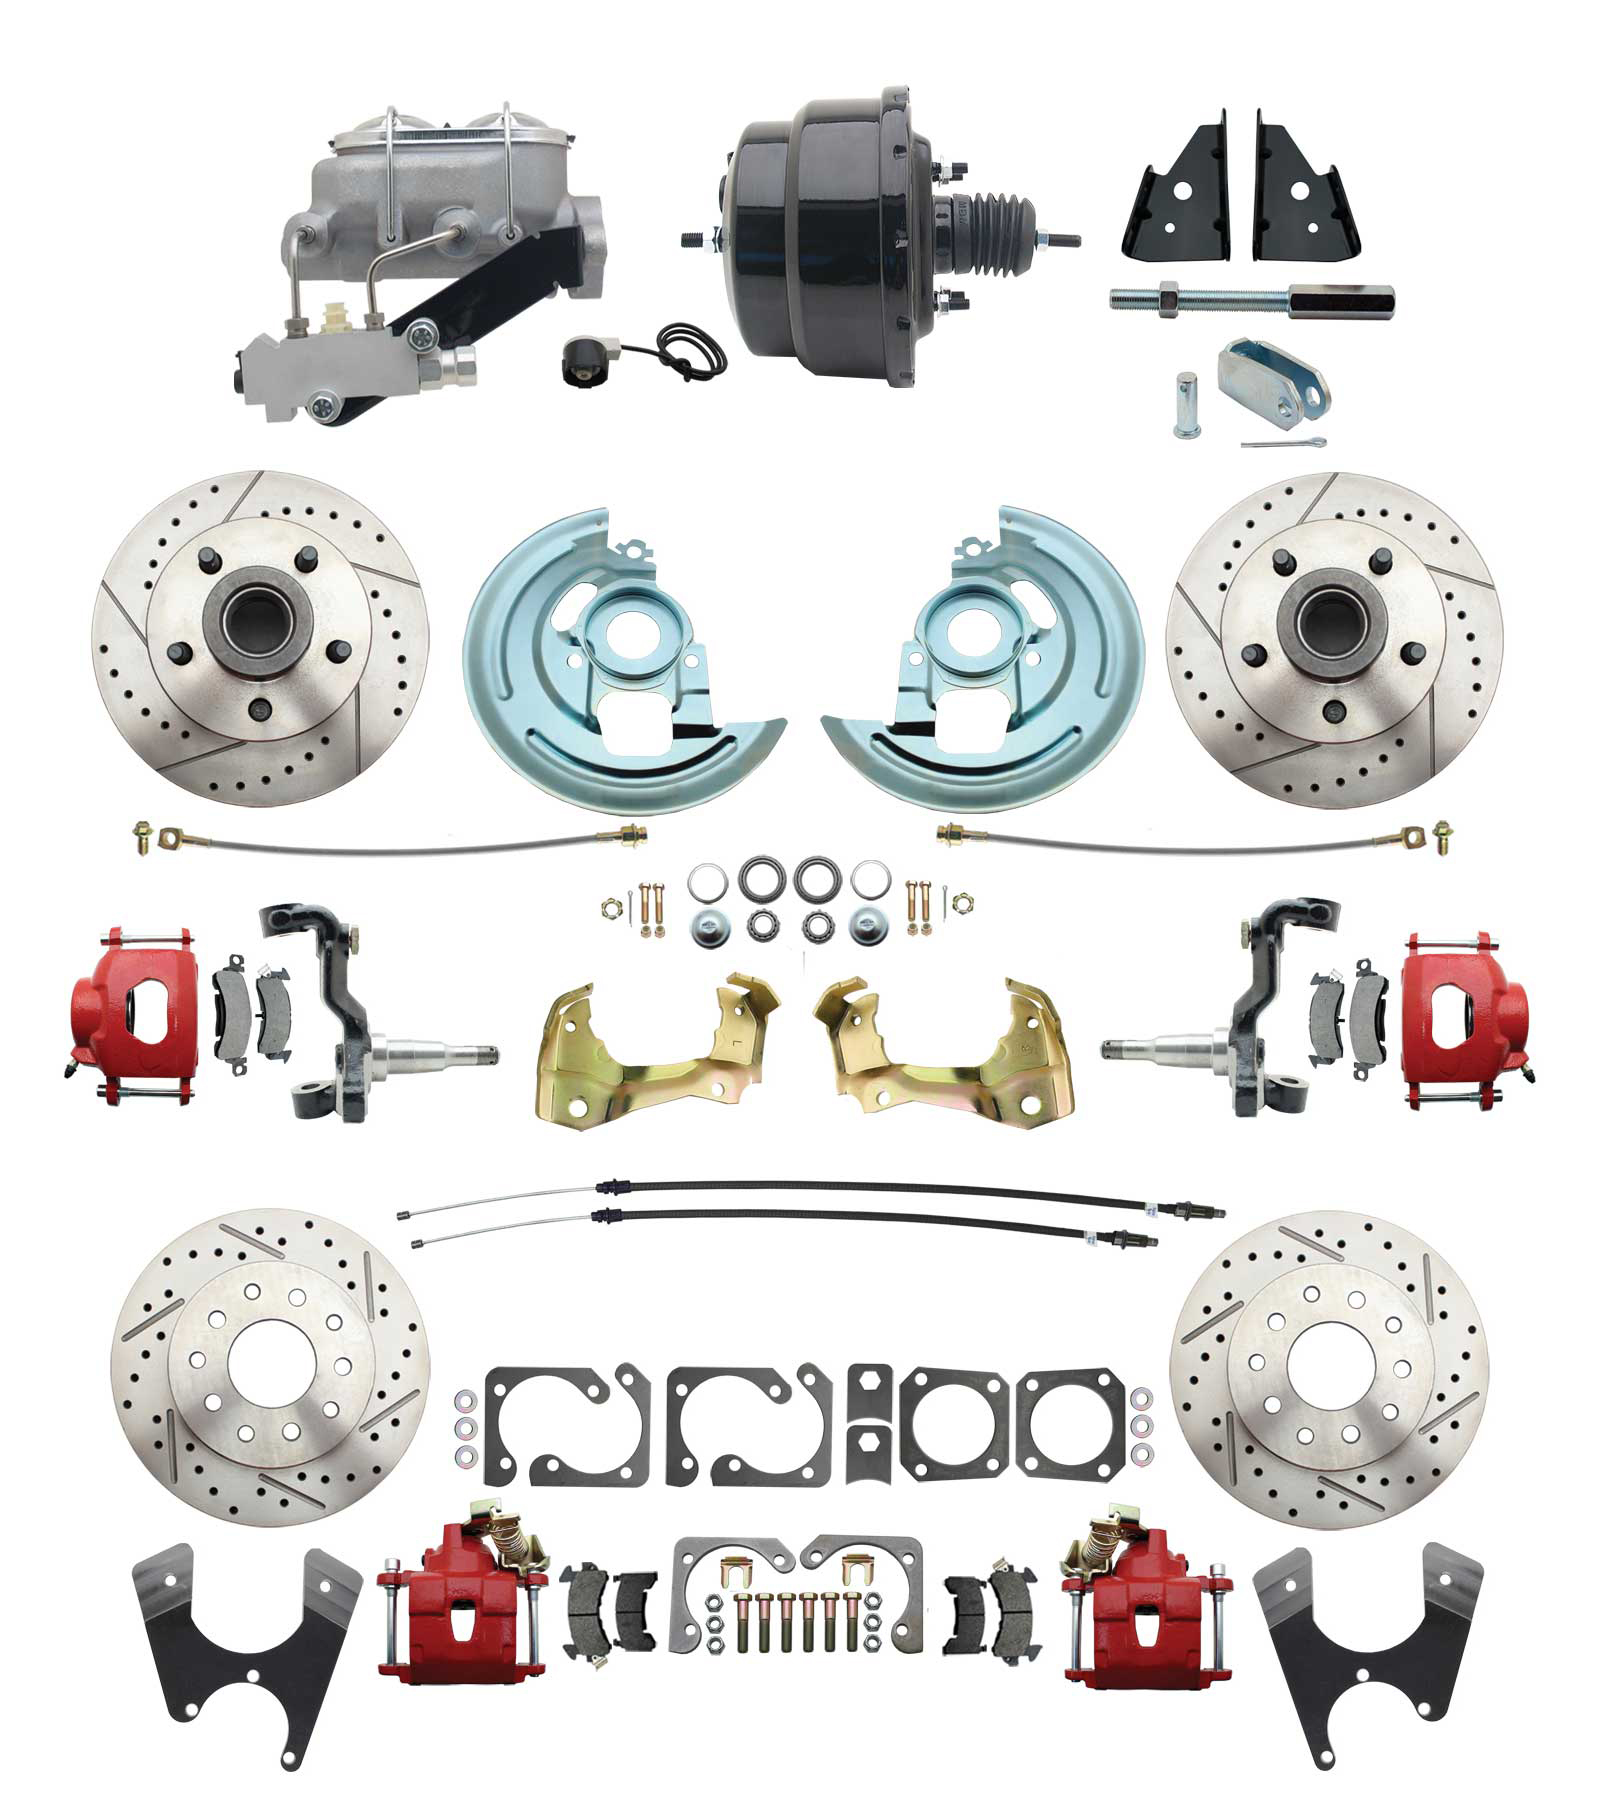 1967-1969 Camaro/ Firebird & 1968-1974 Chevy Nova Front & Rear Power Disc Brake Conversion Kit Drilled & Slotted & Powder Coated Red Calipers Rotors W/ 8 Dual Powder Coated Black Booster Kit